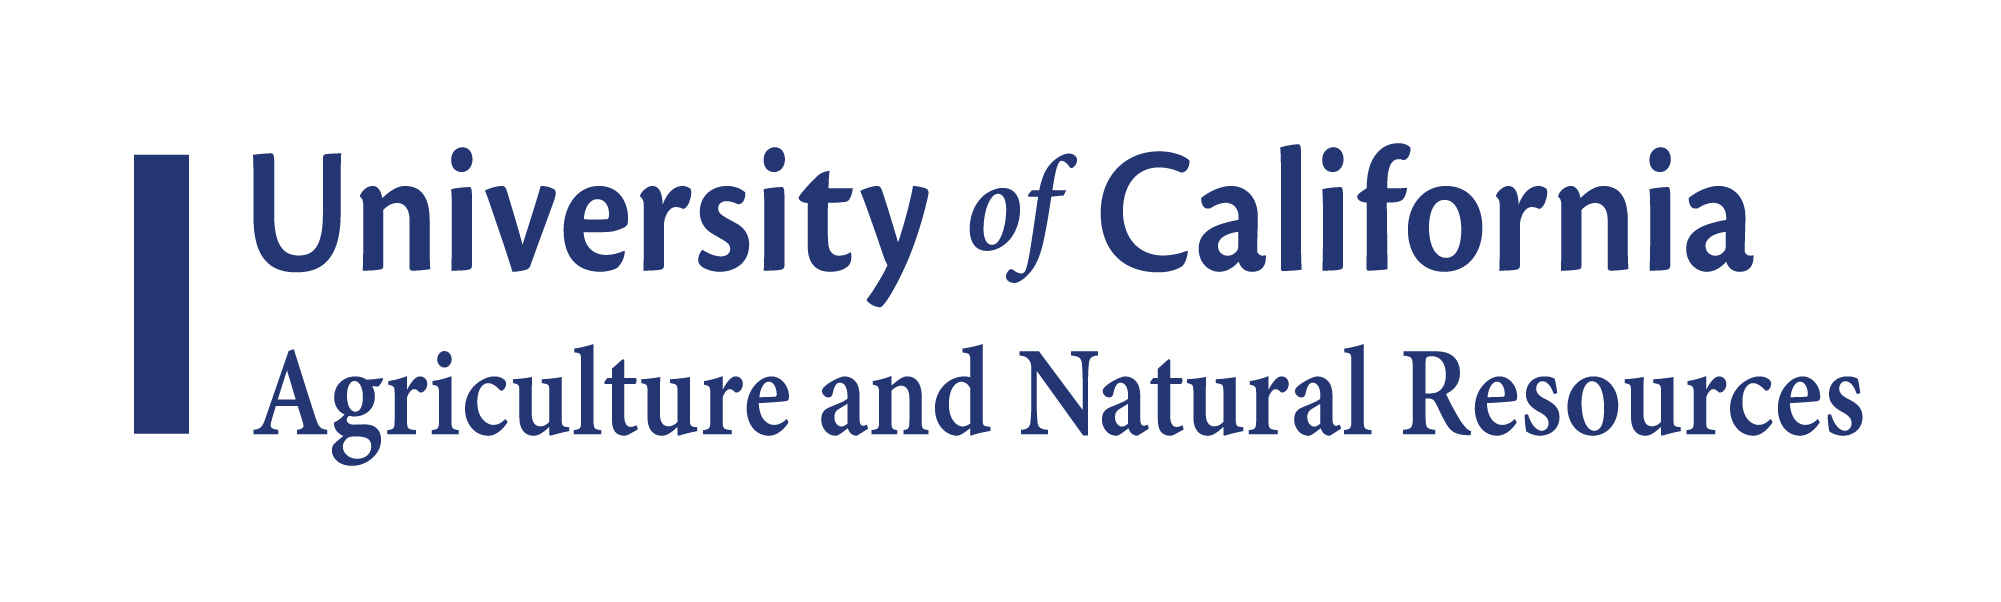 University of California - Agriculture and Natural Resources